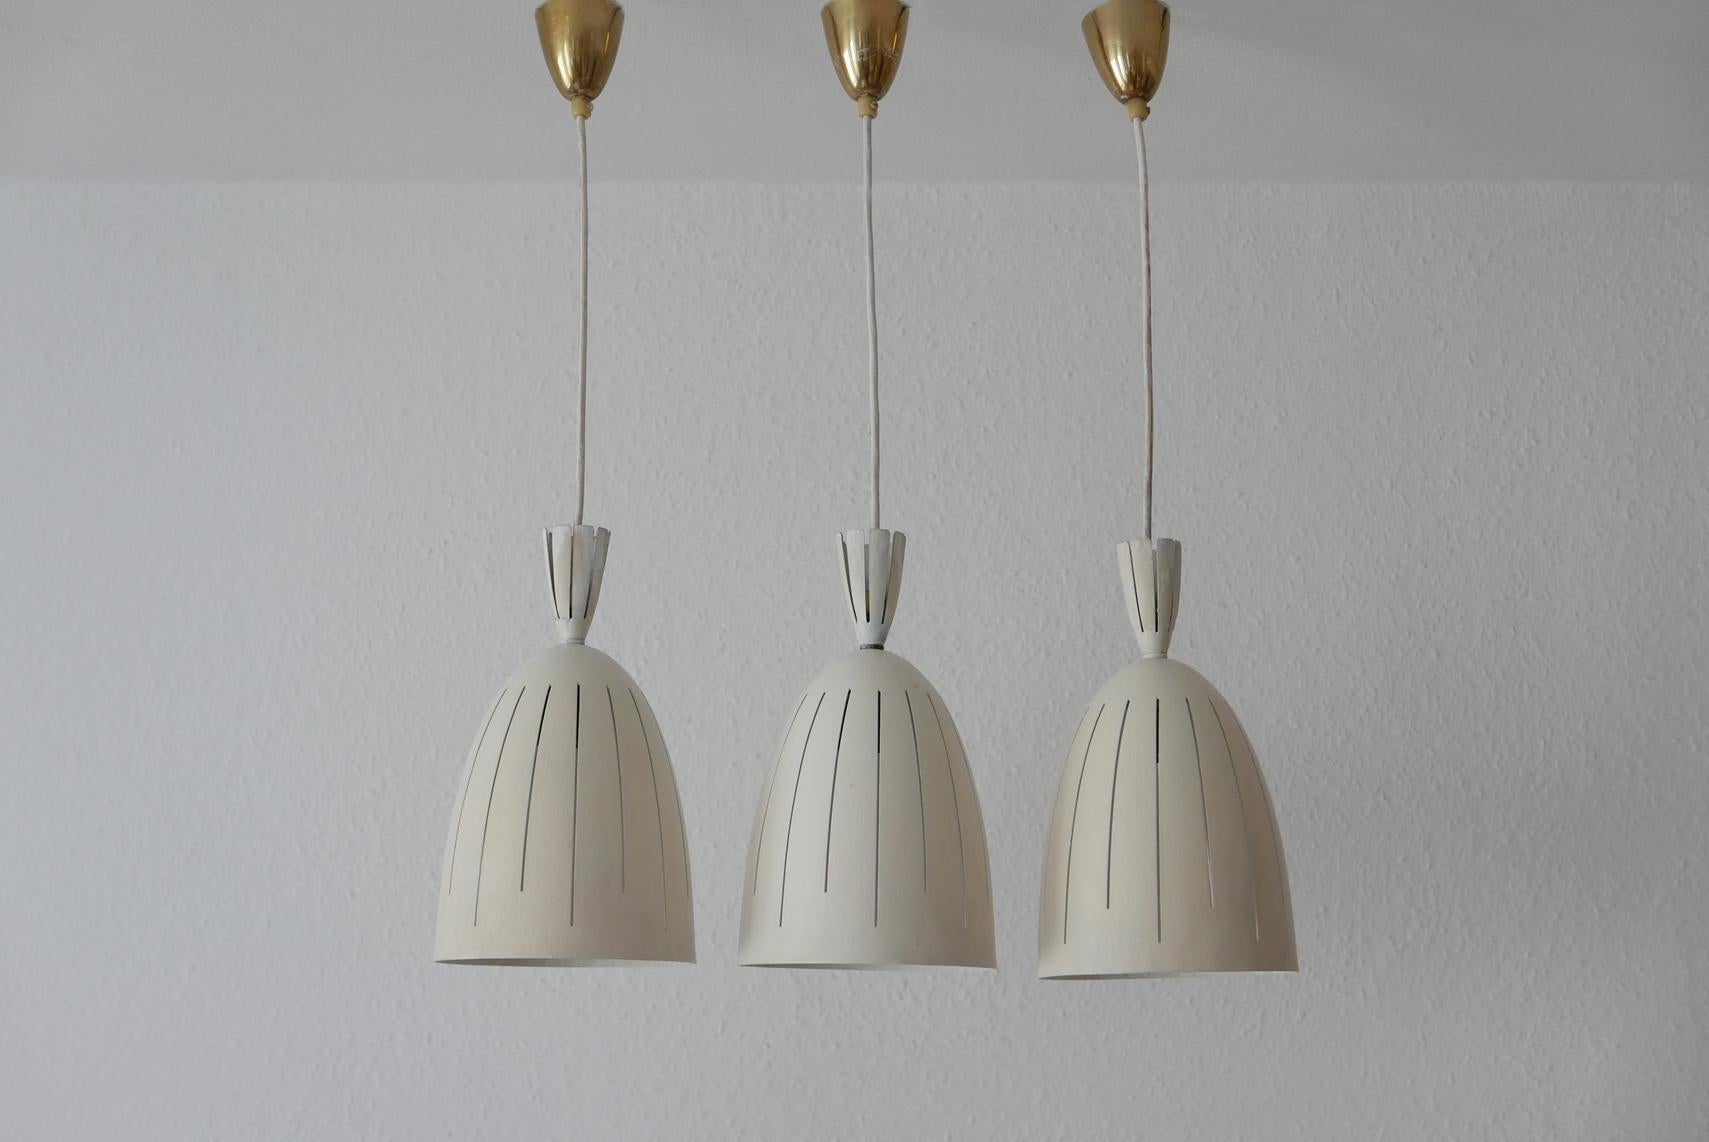 Lacquered Set of Three Lovely Mid-Century Modern Diabolo Pendant Lamps, 1950s, Germany For Sale